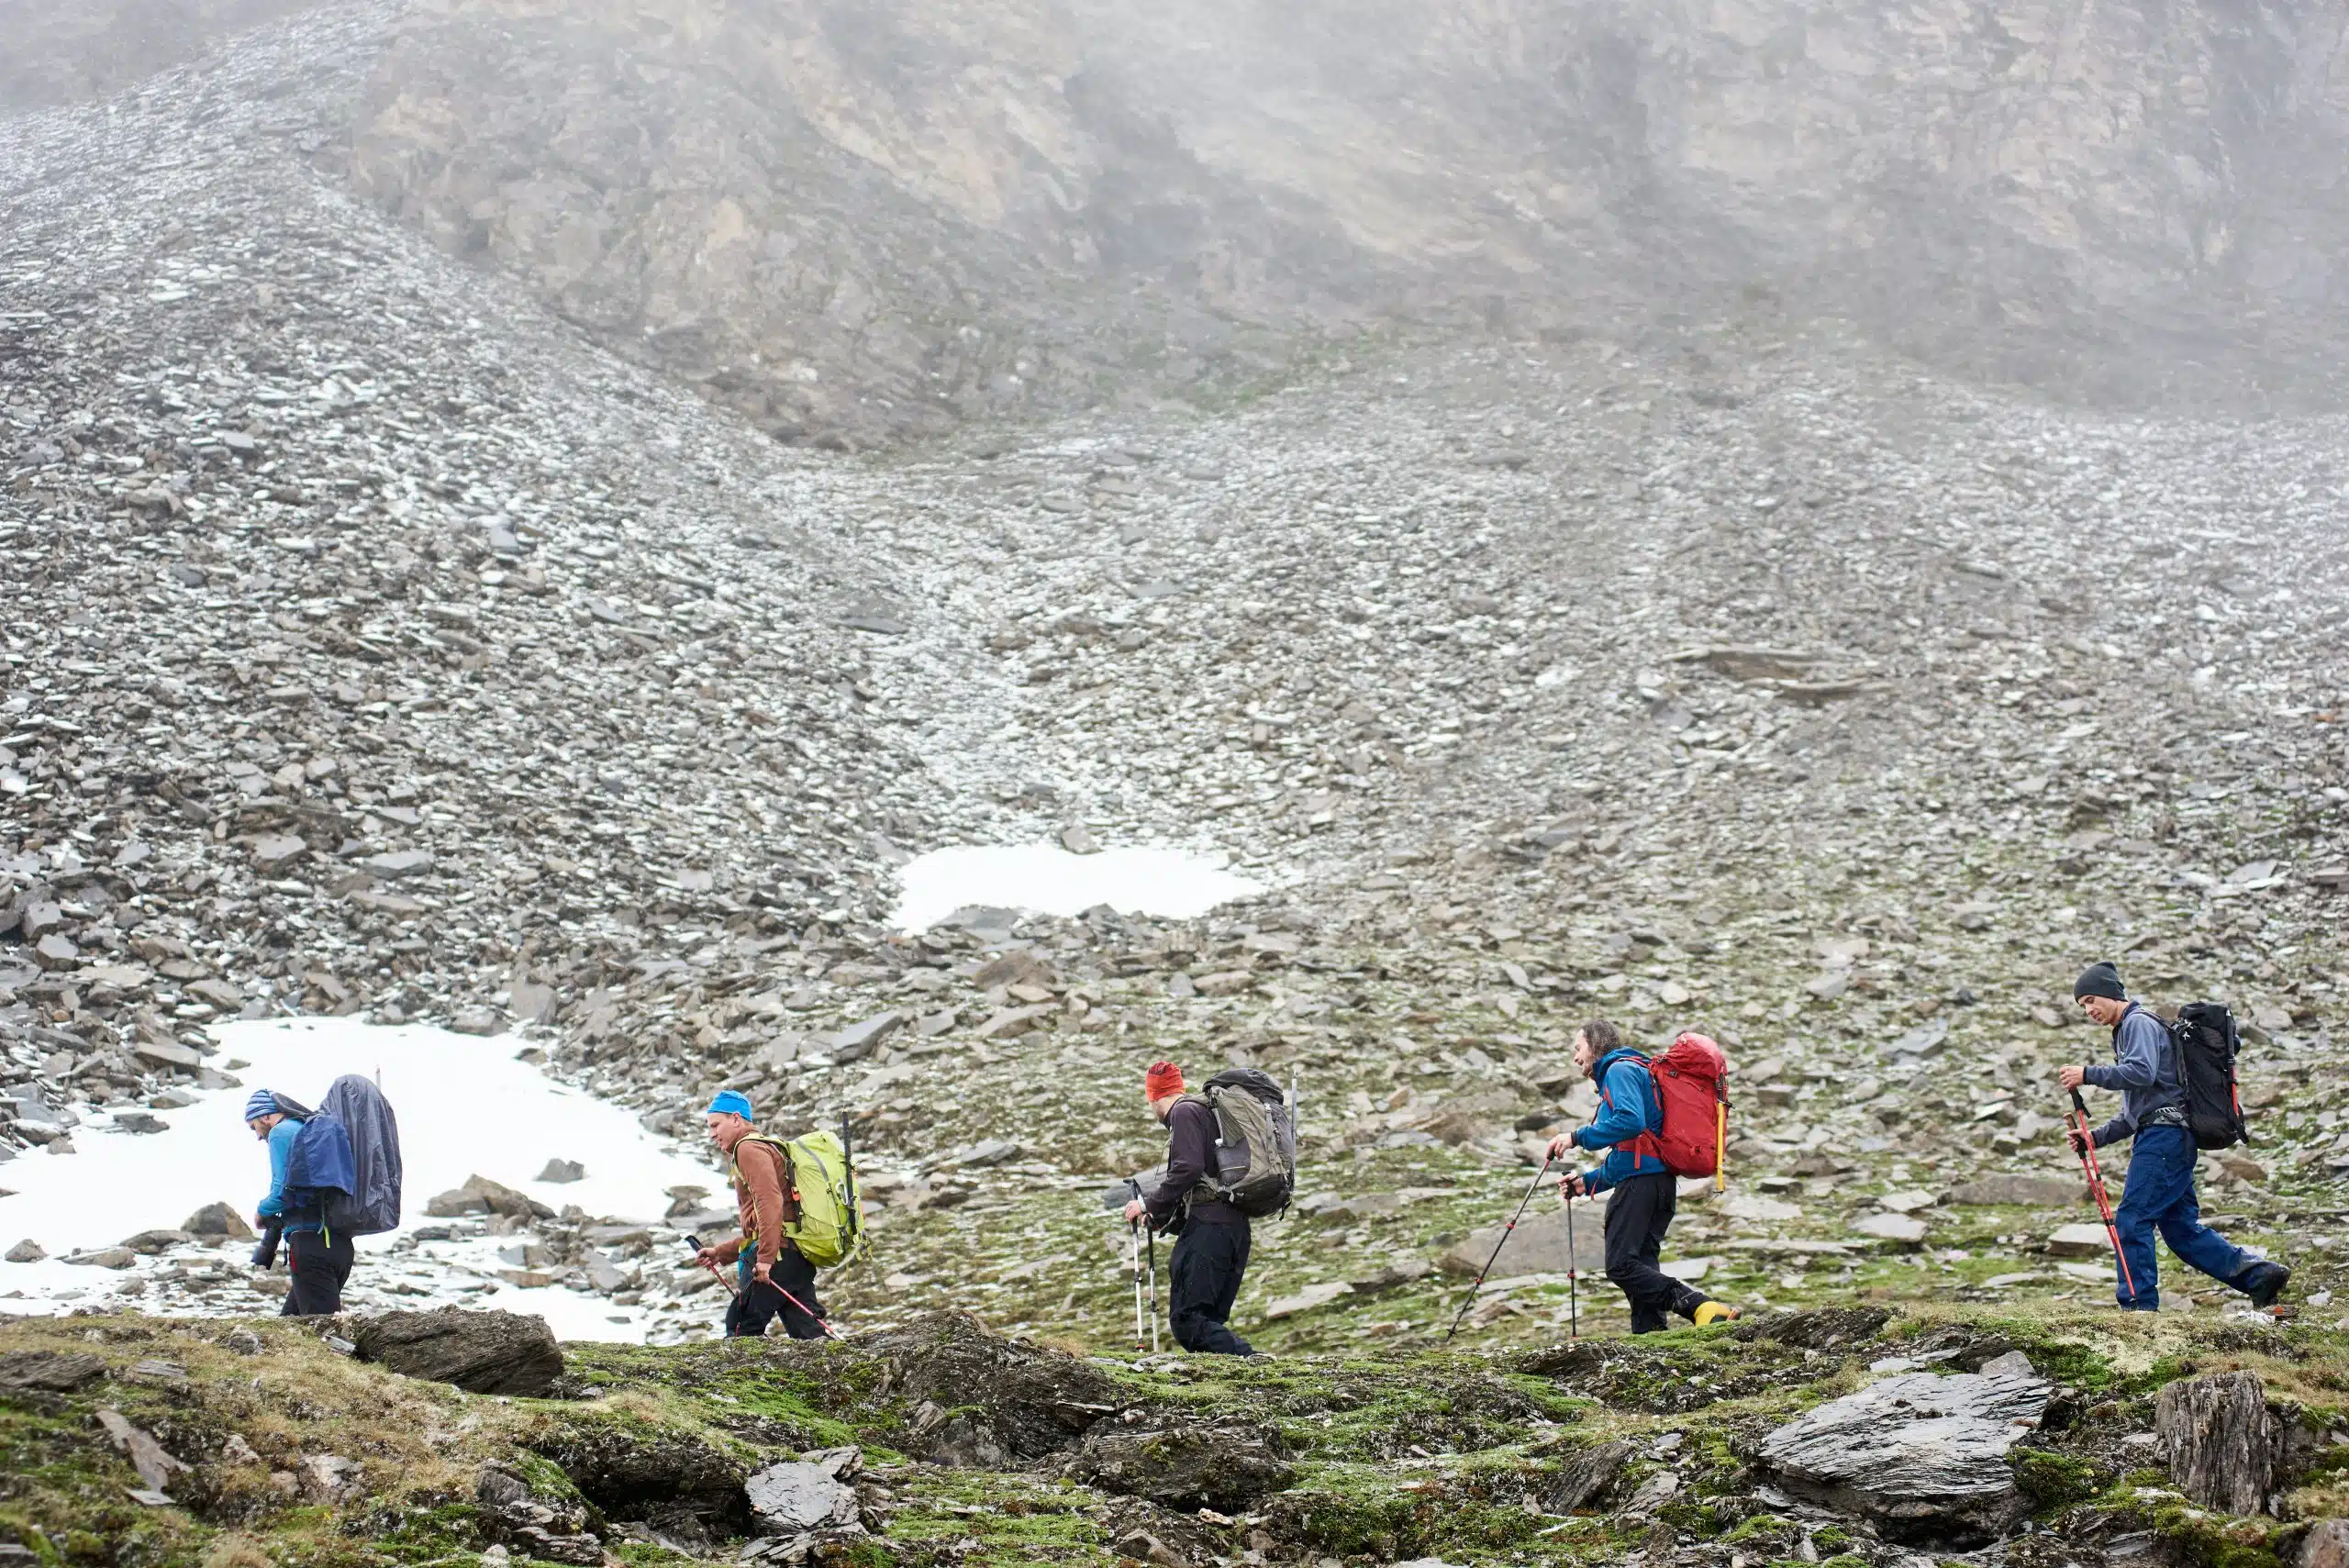 Hikers on a hike with hiking poles